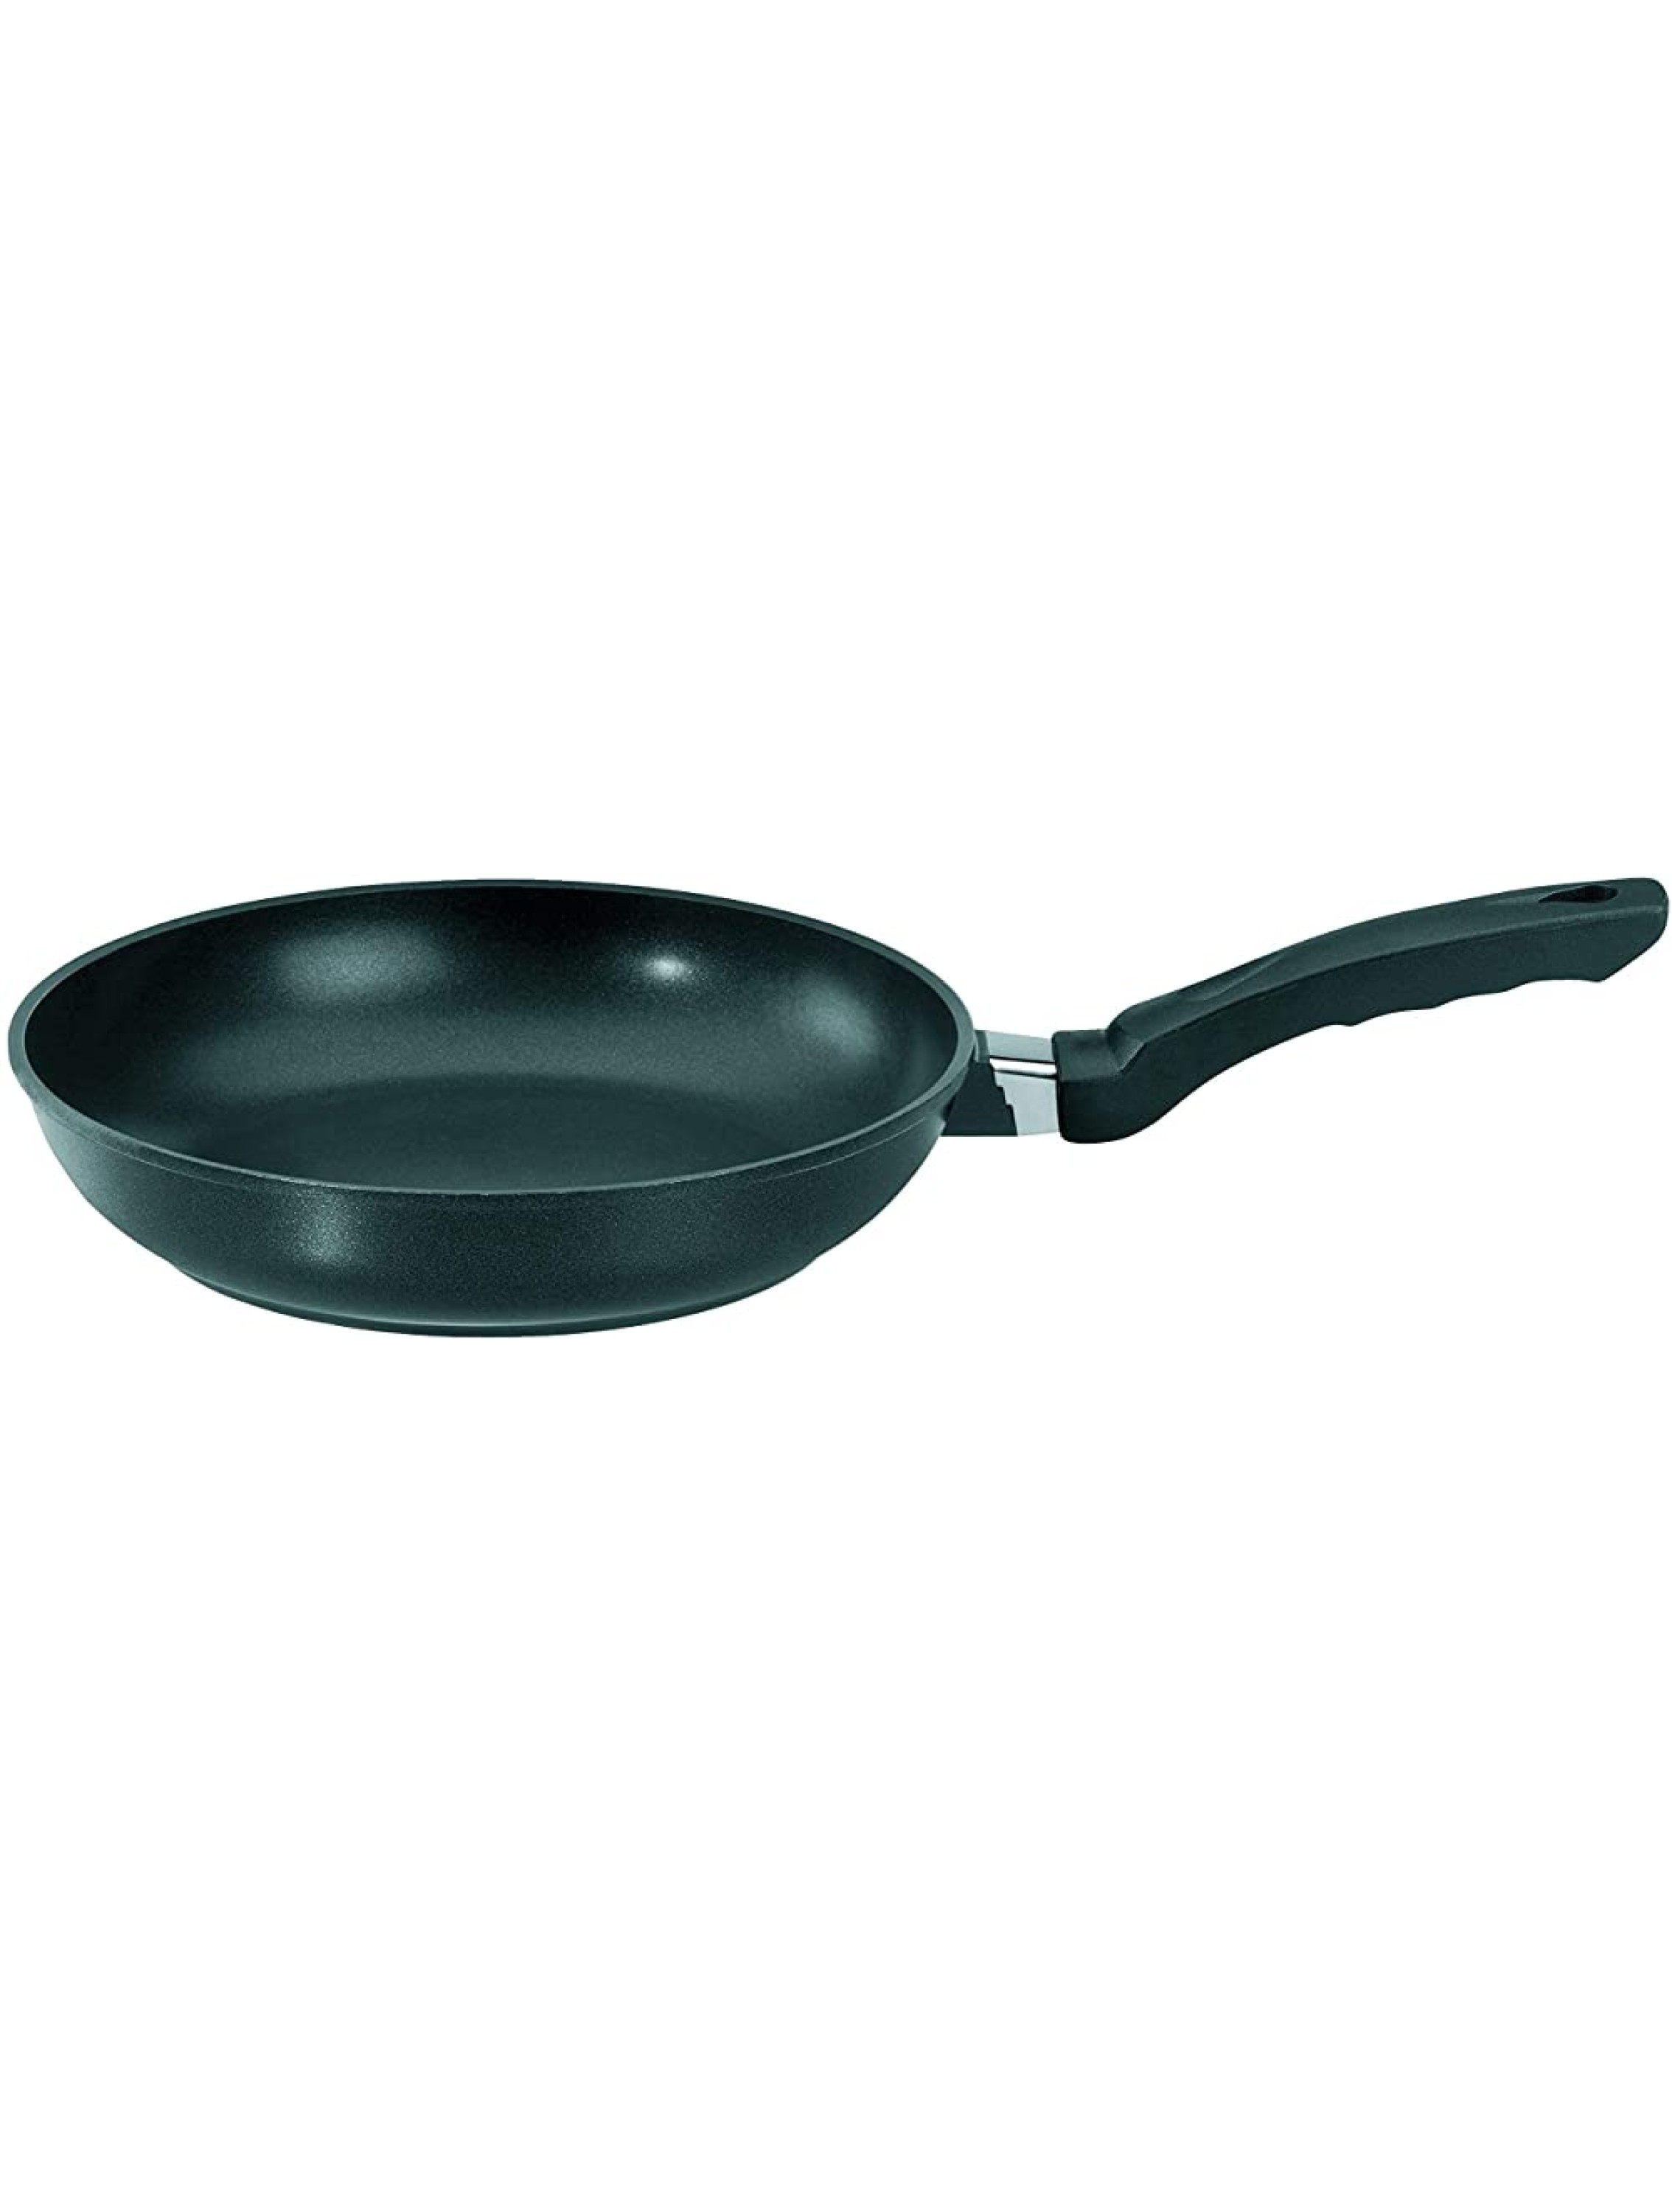 ELO Rubicast Cast Aluminum Kitchen Induction Cookware Frying Pan with Durable Non-Stick Coating 12.5-inch - BNB4580DQ